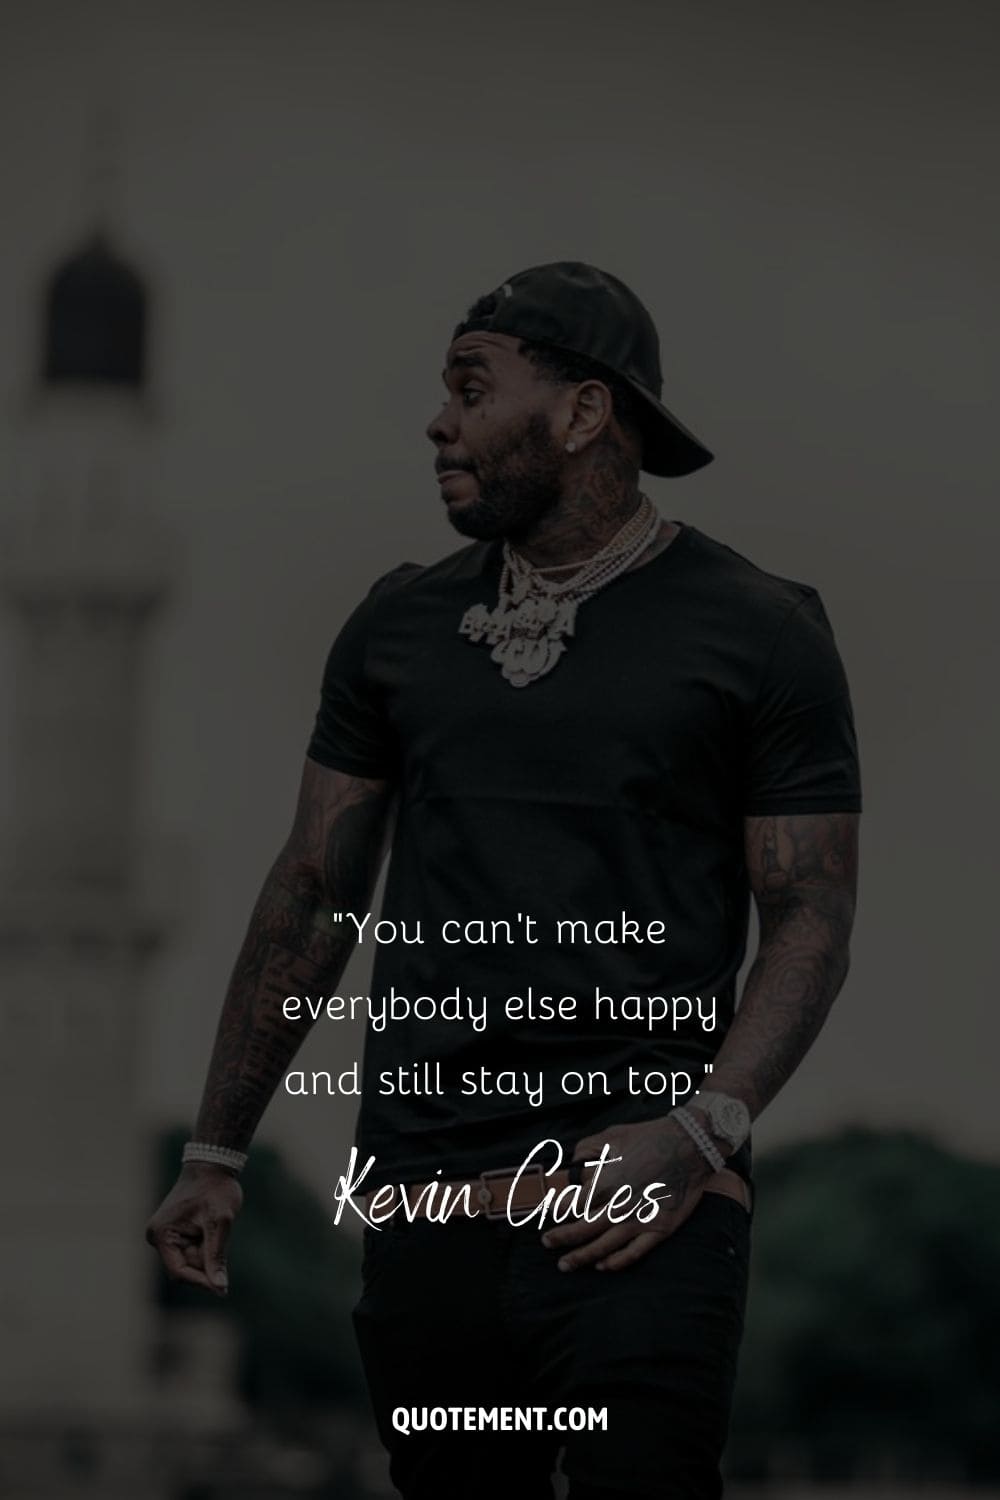 “You can’t make everybody else happy and still stay on top.” – Kevin Gates